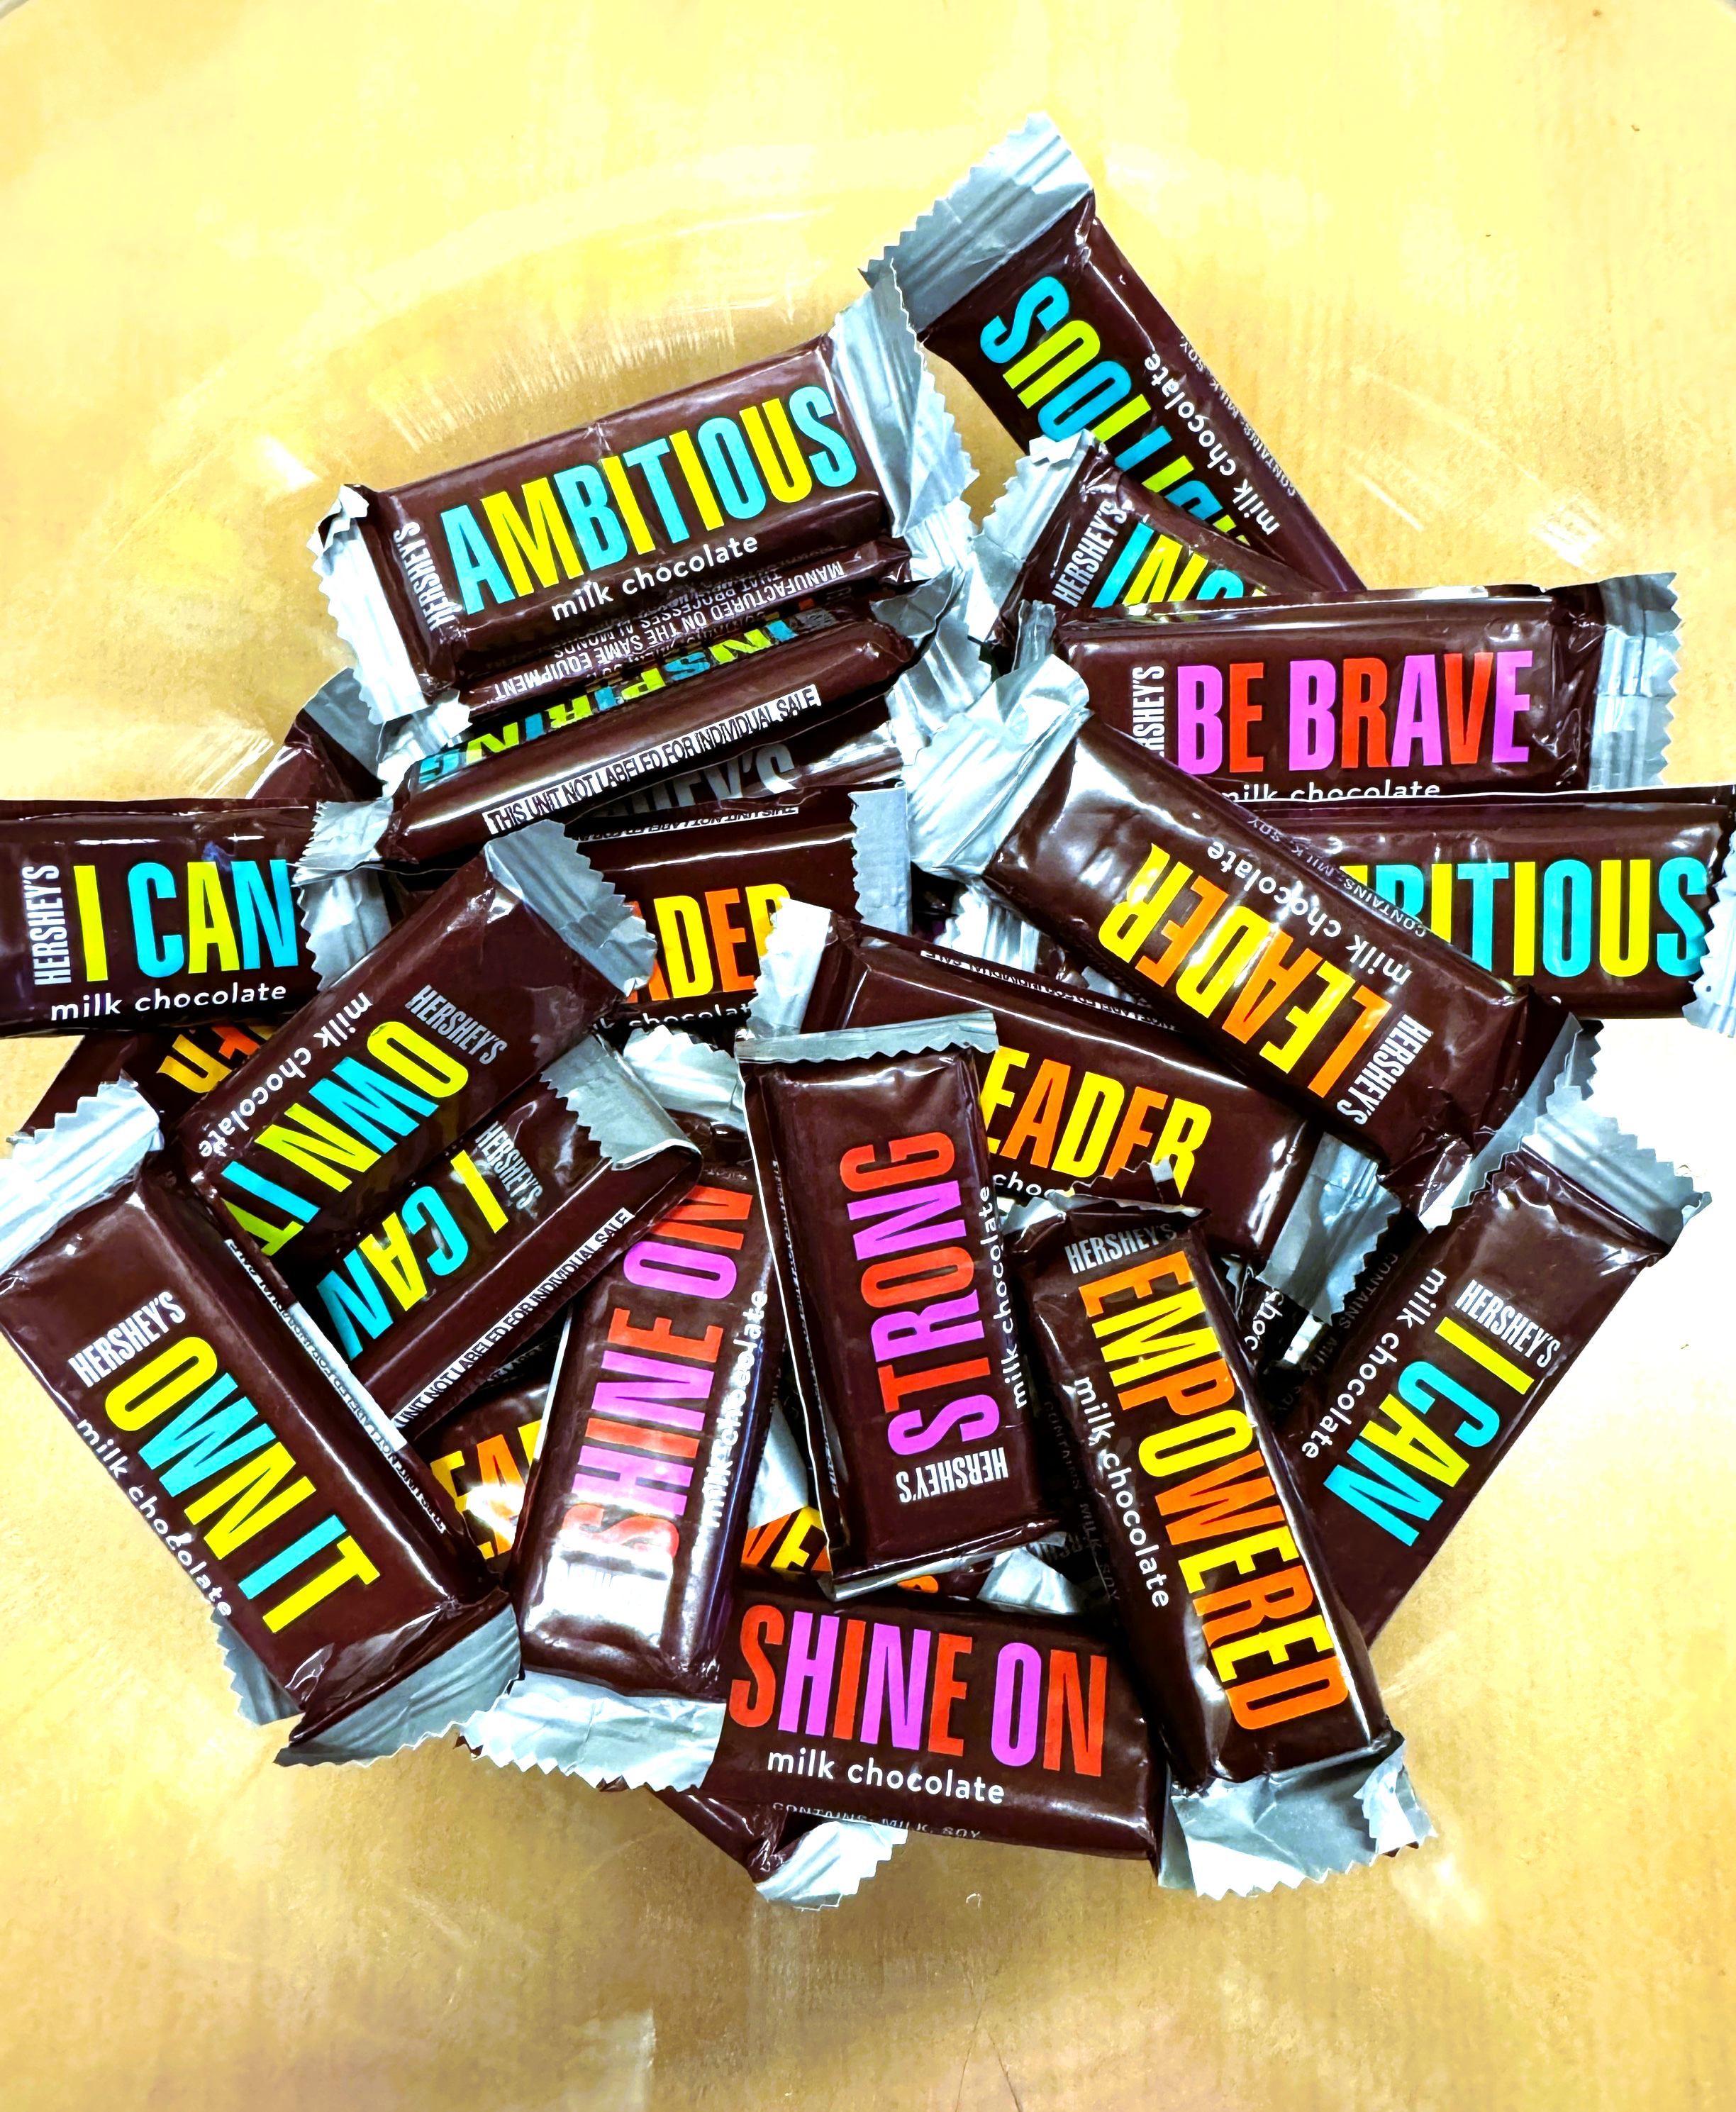 A bowl of inspirational chocolates with words like: be brave, ambitious, leader strong, I can, own it, shine on.